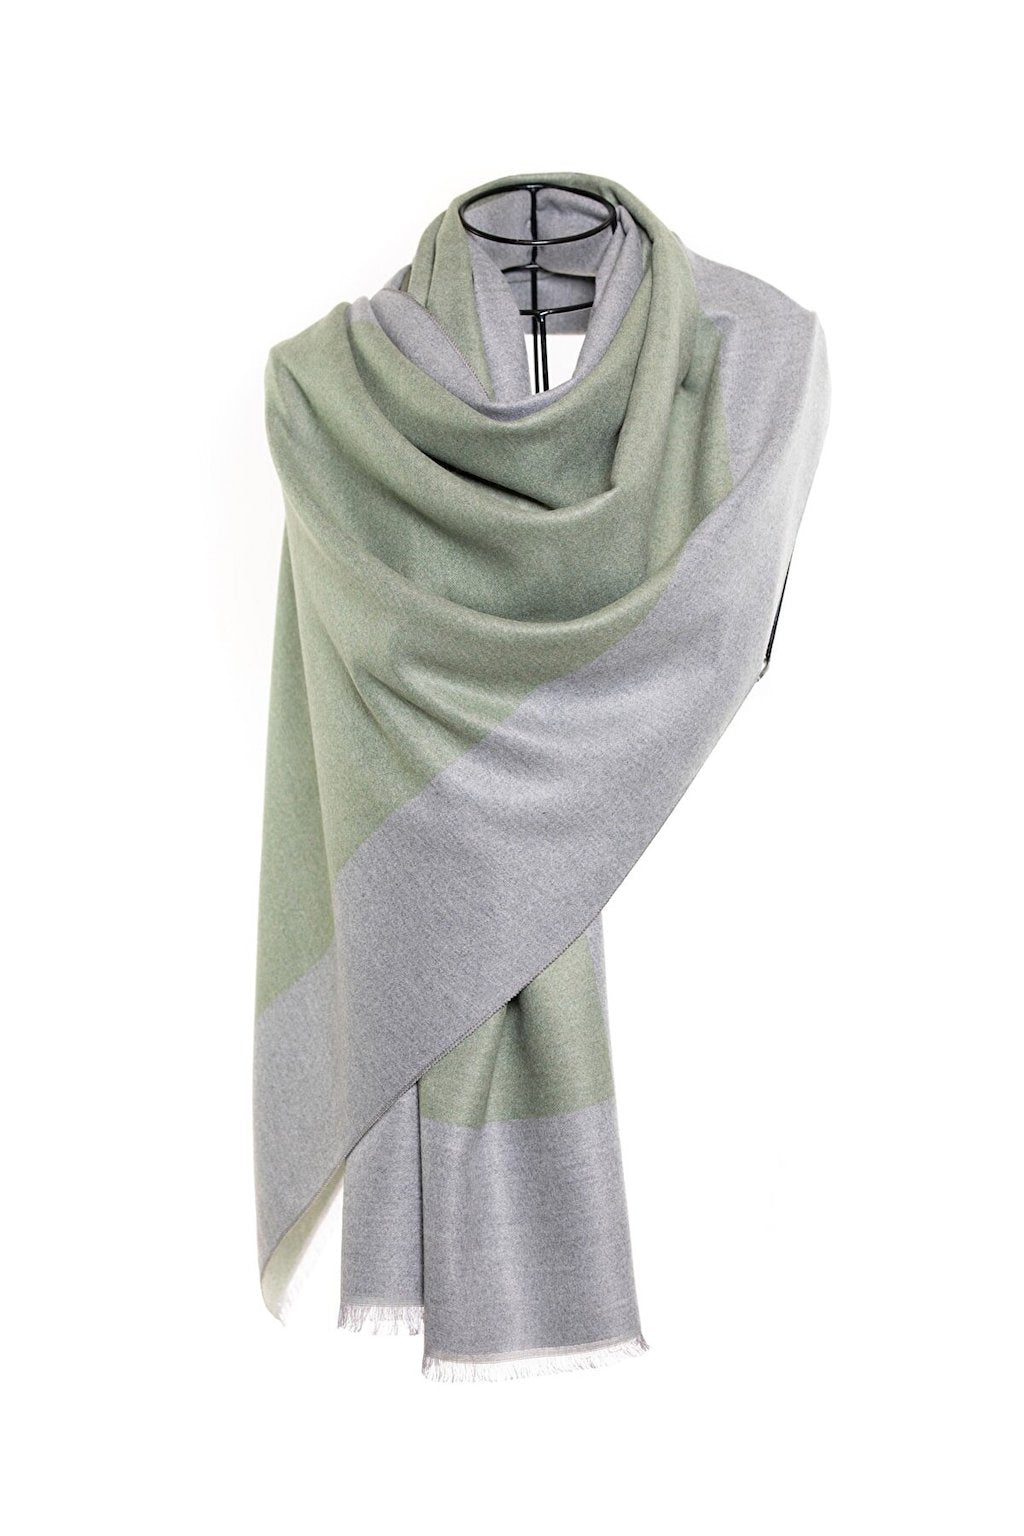 Reversible Mo-shmere Double Rectangle Shawl - Green Gray